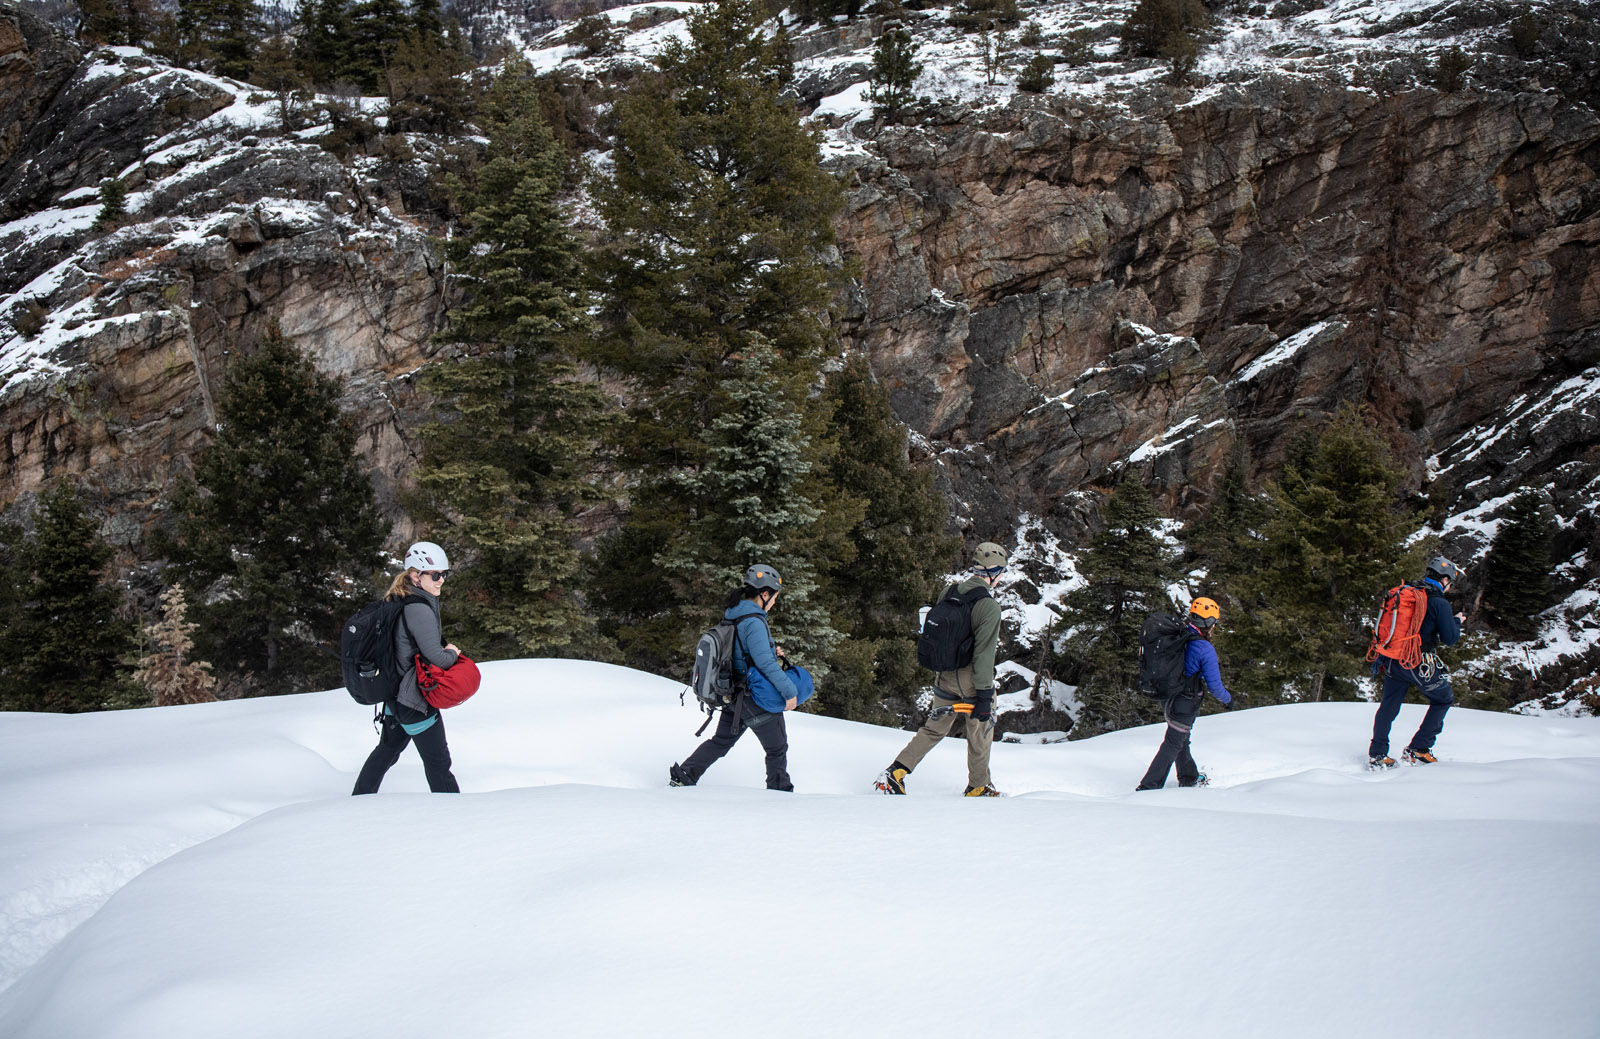 Trip Leader and Associate Director of Outdoor Education David Crye leads students along a trail in the Ouray Ice Park to get to an area where they can climb. Outdoor Education took students new to ice climbing to the Ouray Ice Park in Ouray, Colorado during a block break trip. The low-cost trip is designed for students who are new to ice climbing and might not otherwise be able to try out the sport due to the investment required to take lessons and purchase or rent equipment.